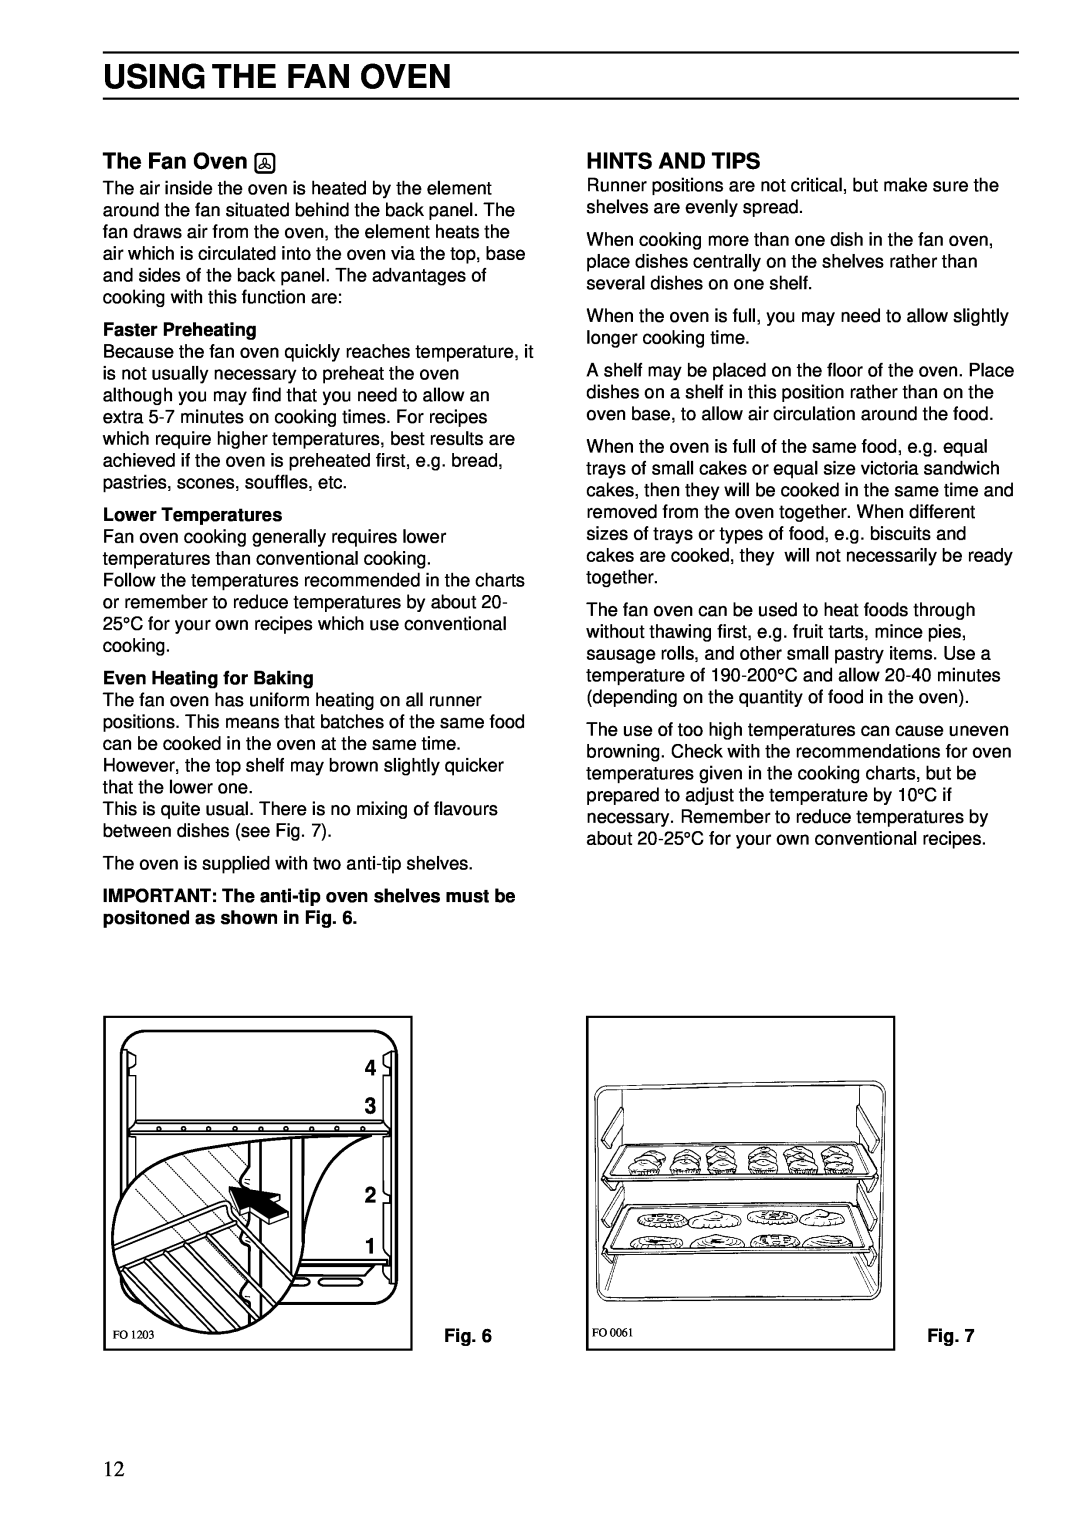 Zanussi ZSA 25 installation manual Using The Fan Oven, Hints And Tips 